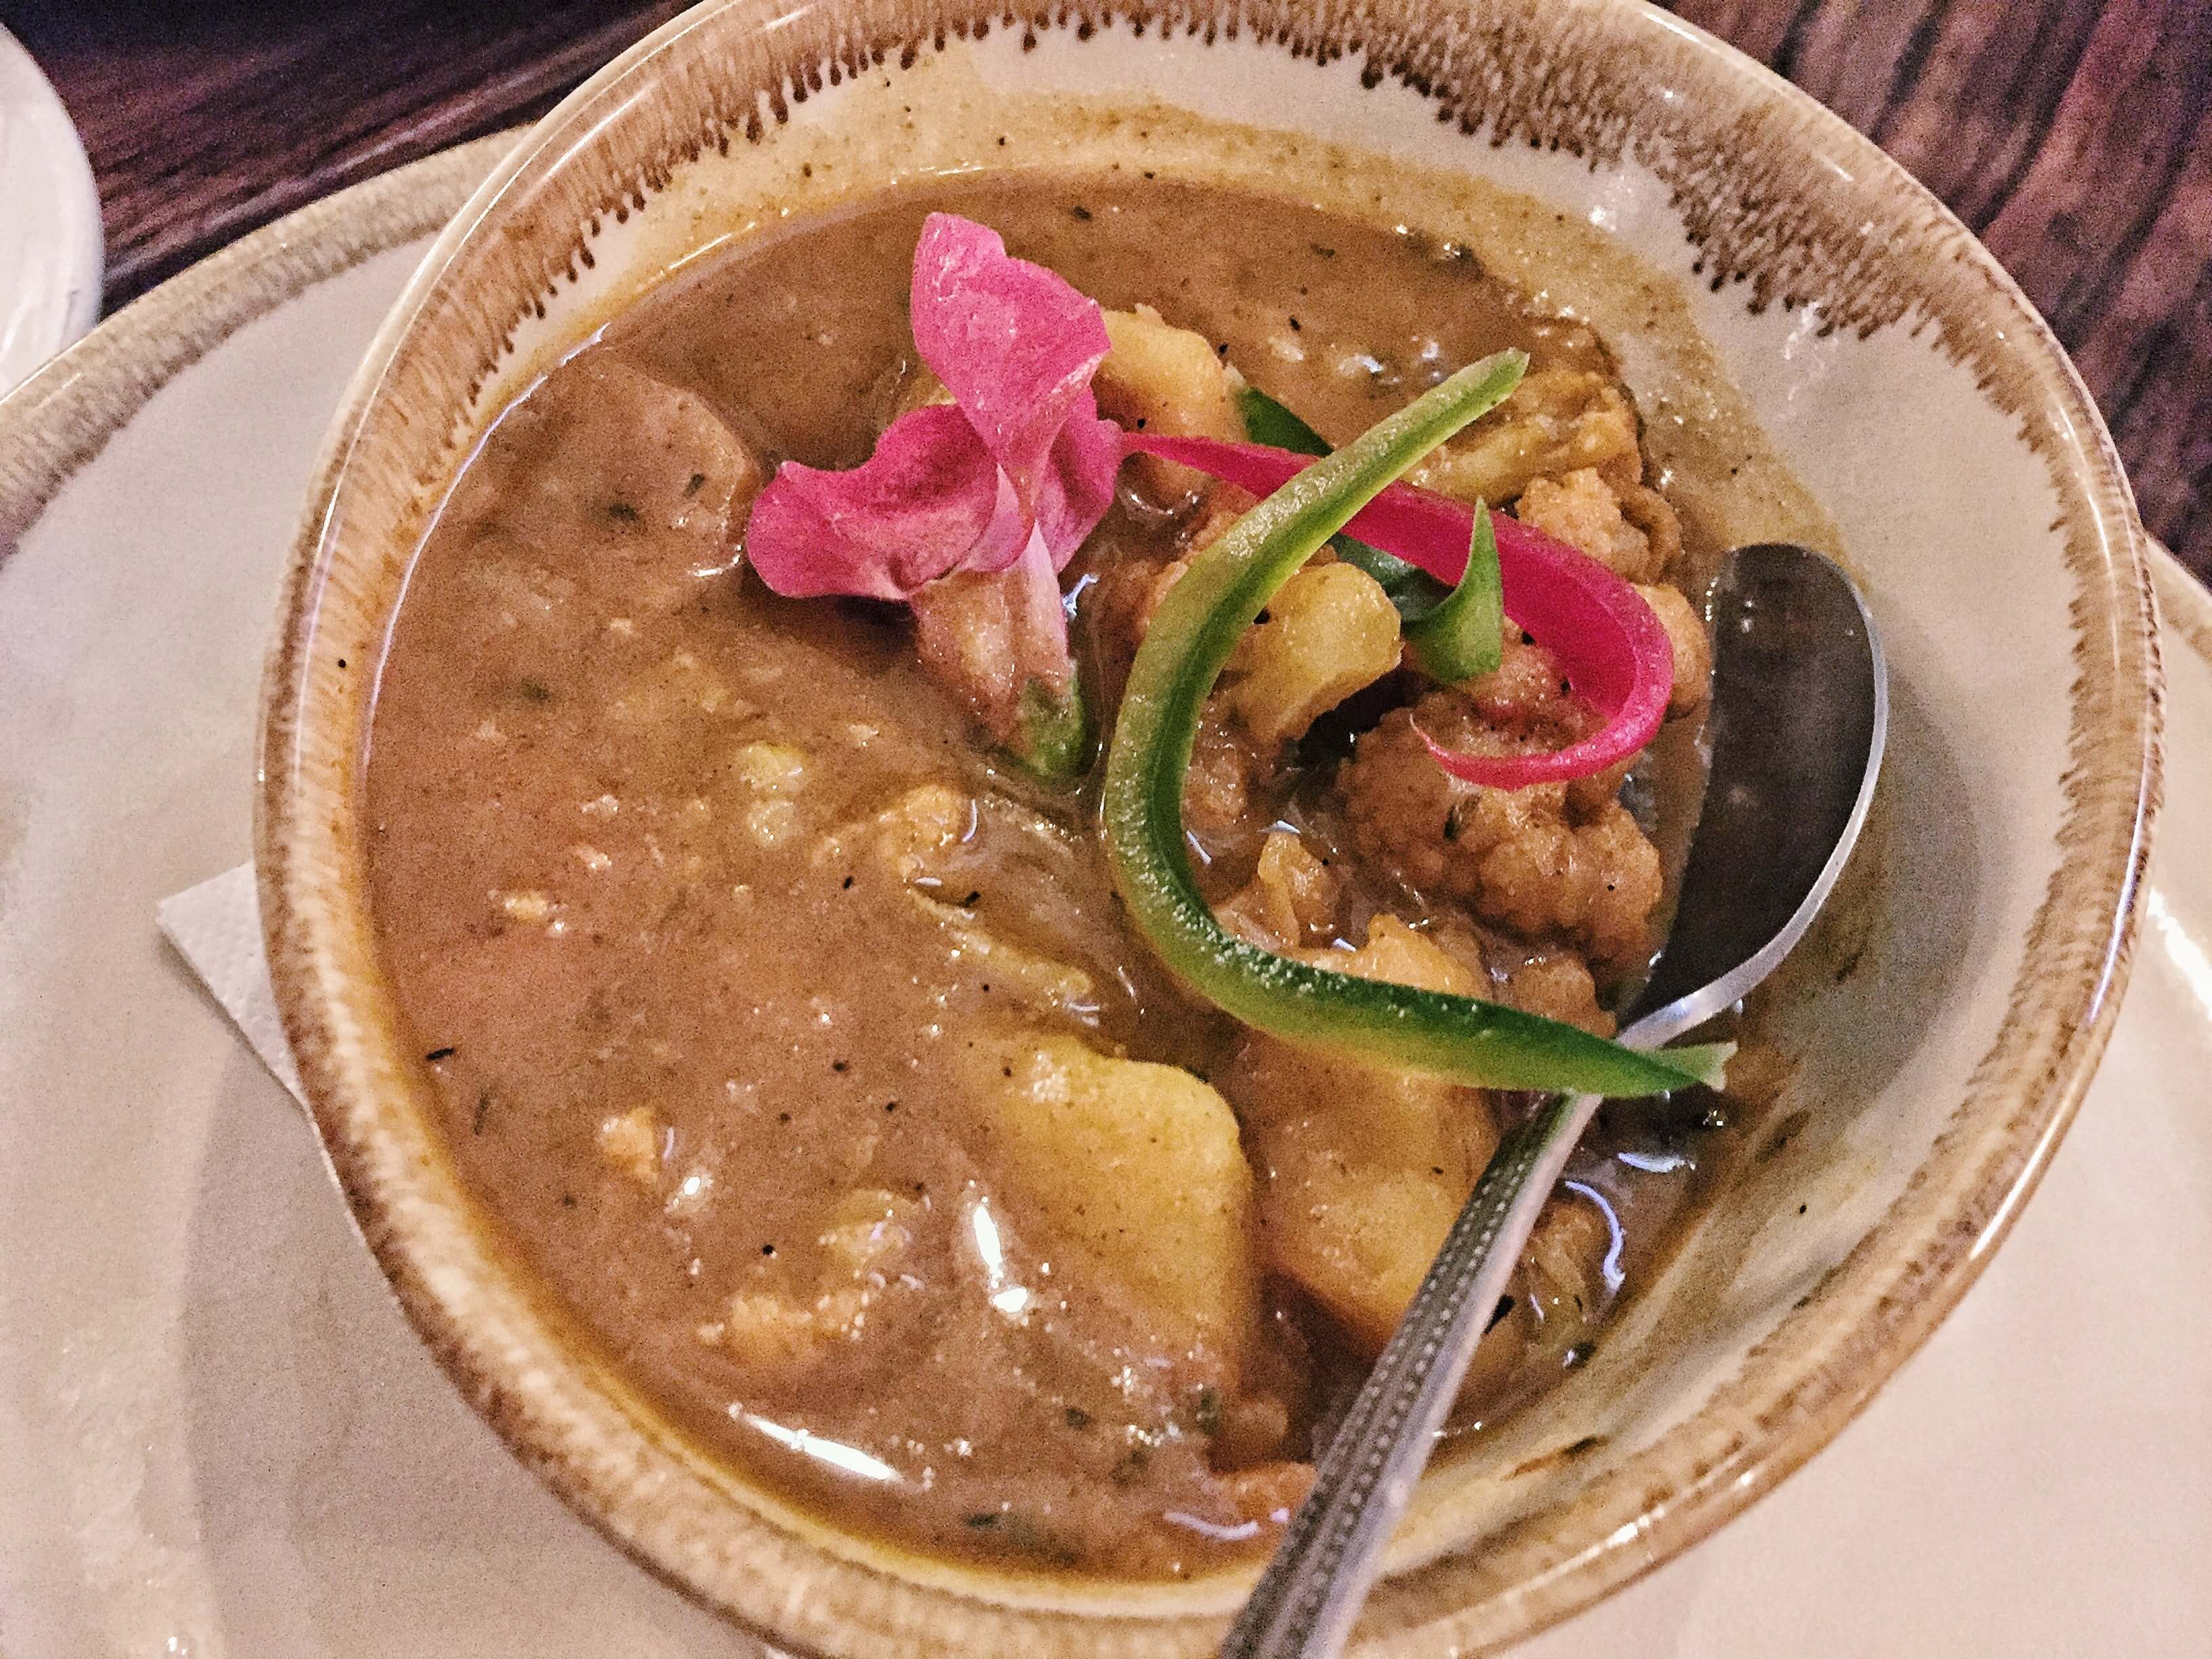 Vegetable stew at Cottons Caribbean restaurant in Shoreditch, London